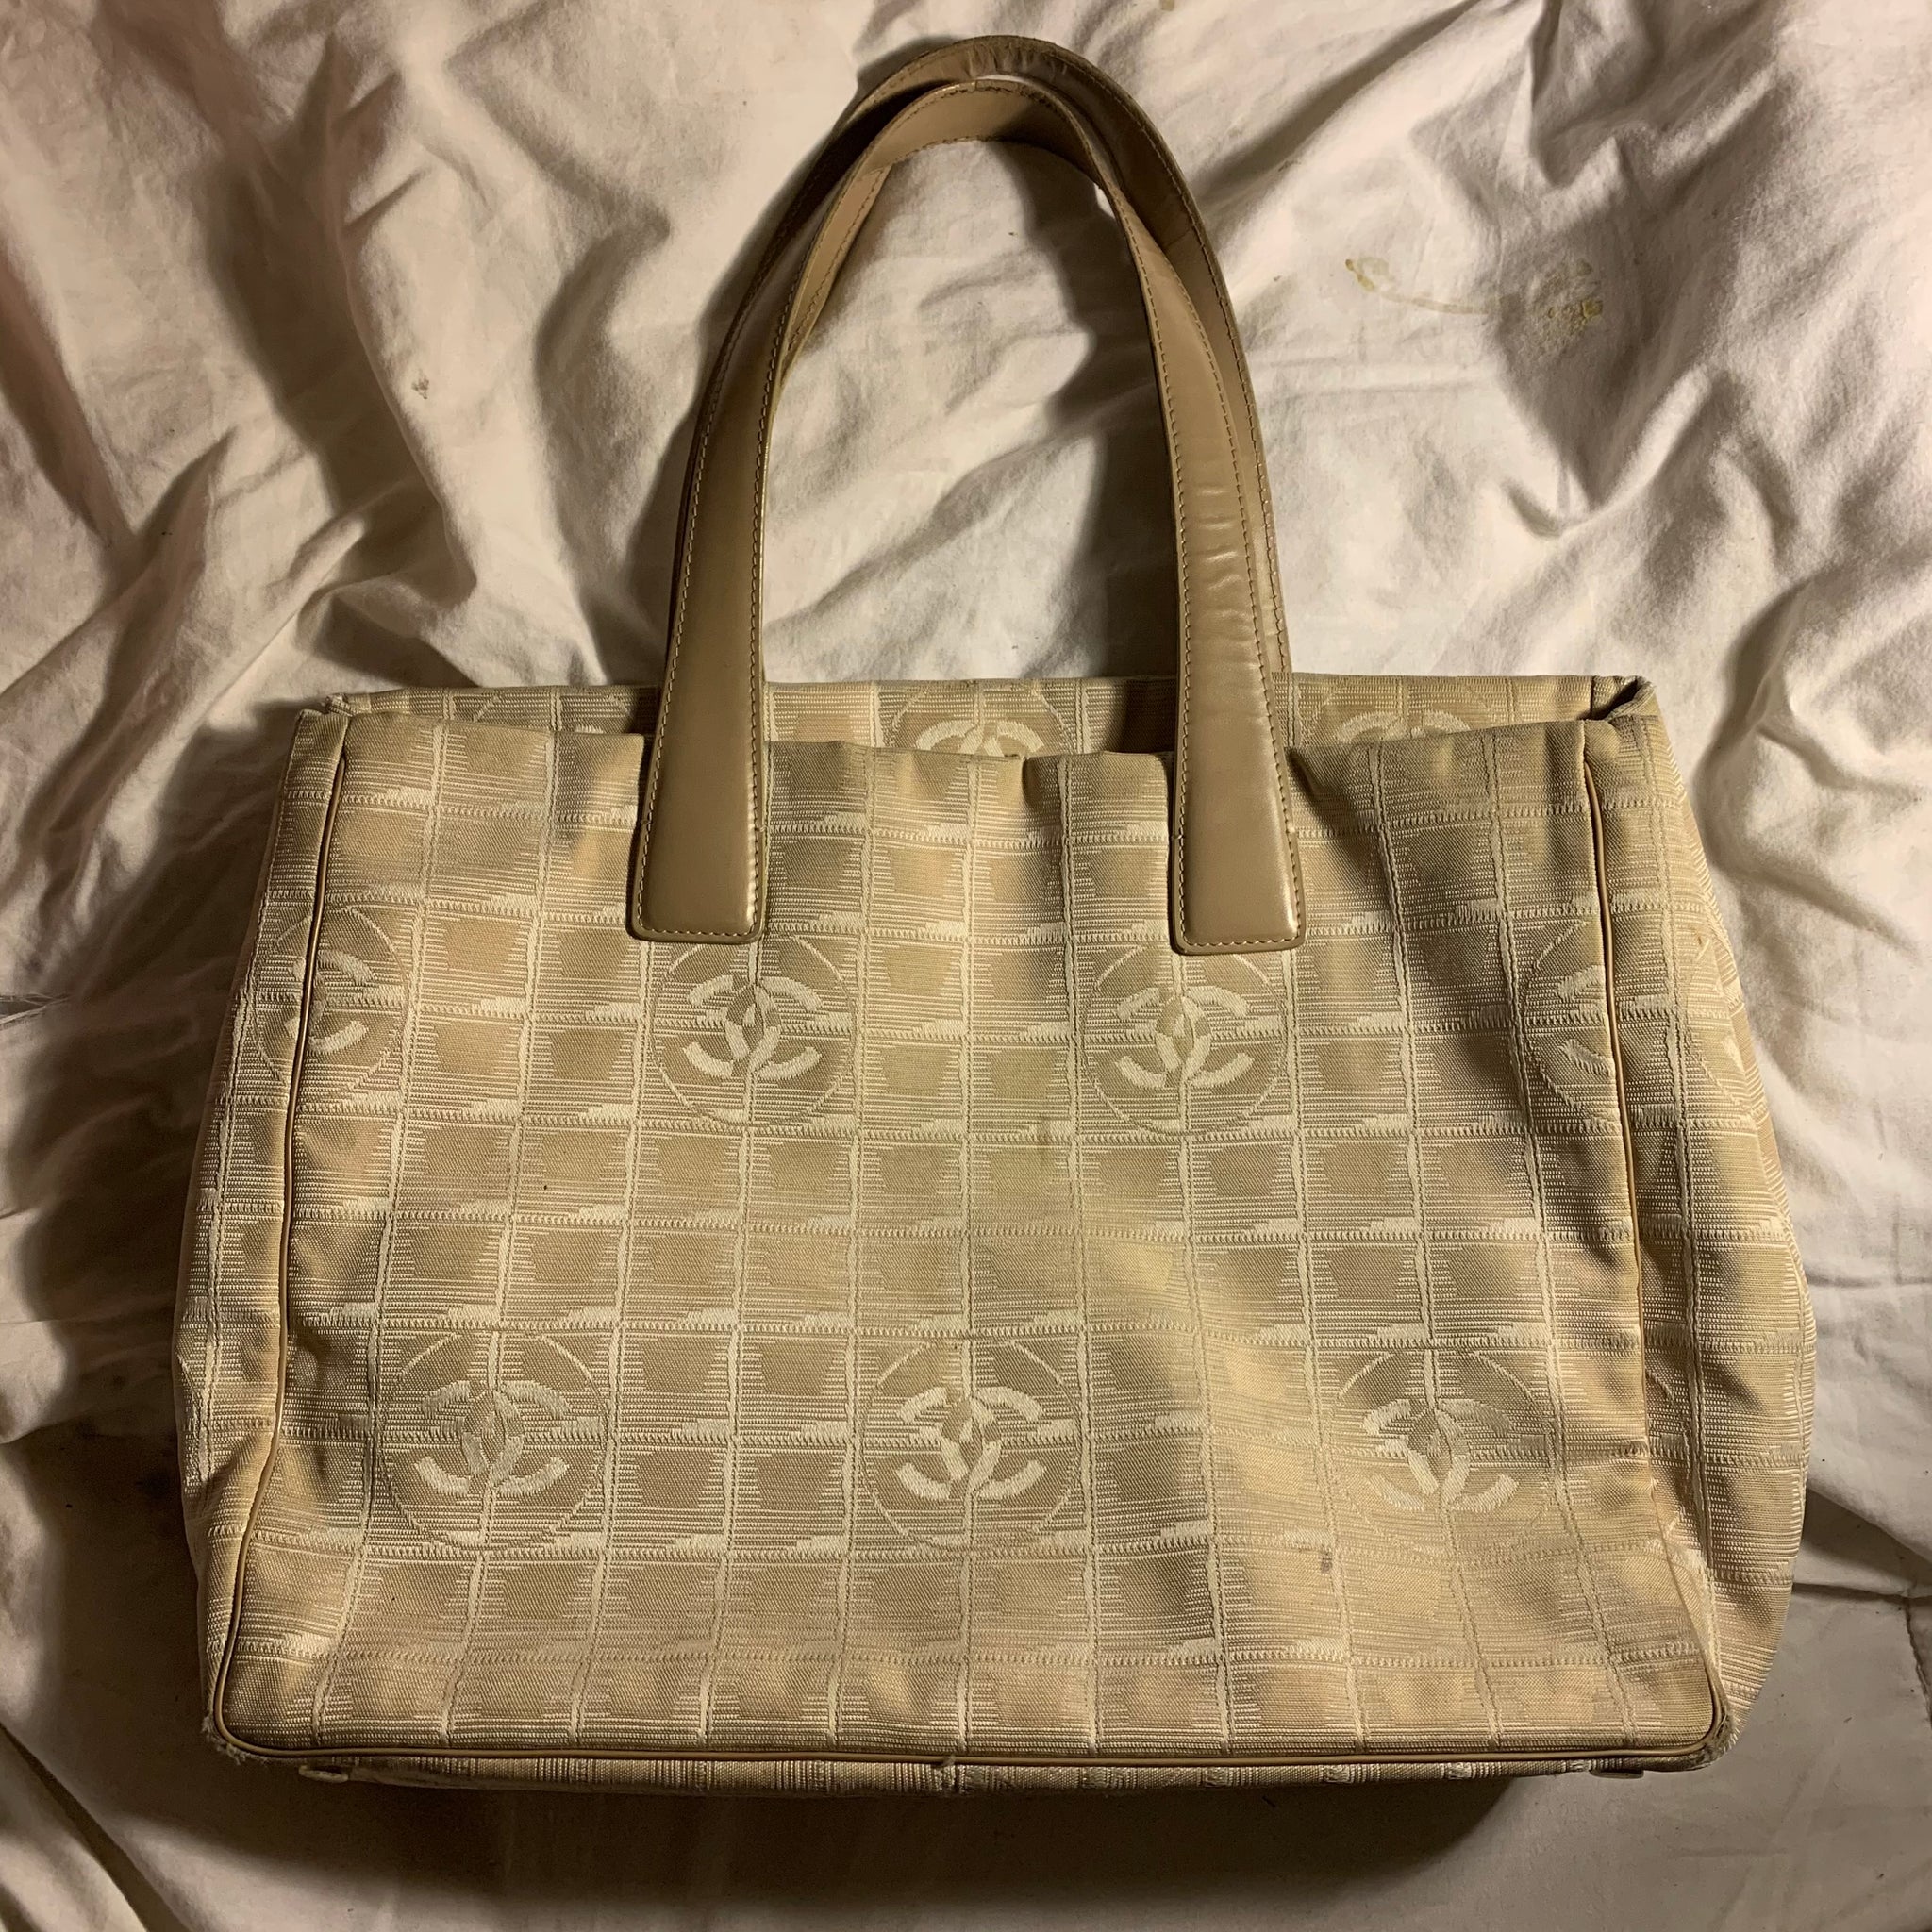 authentic chanel duffle bag